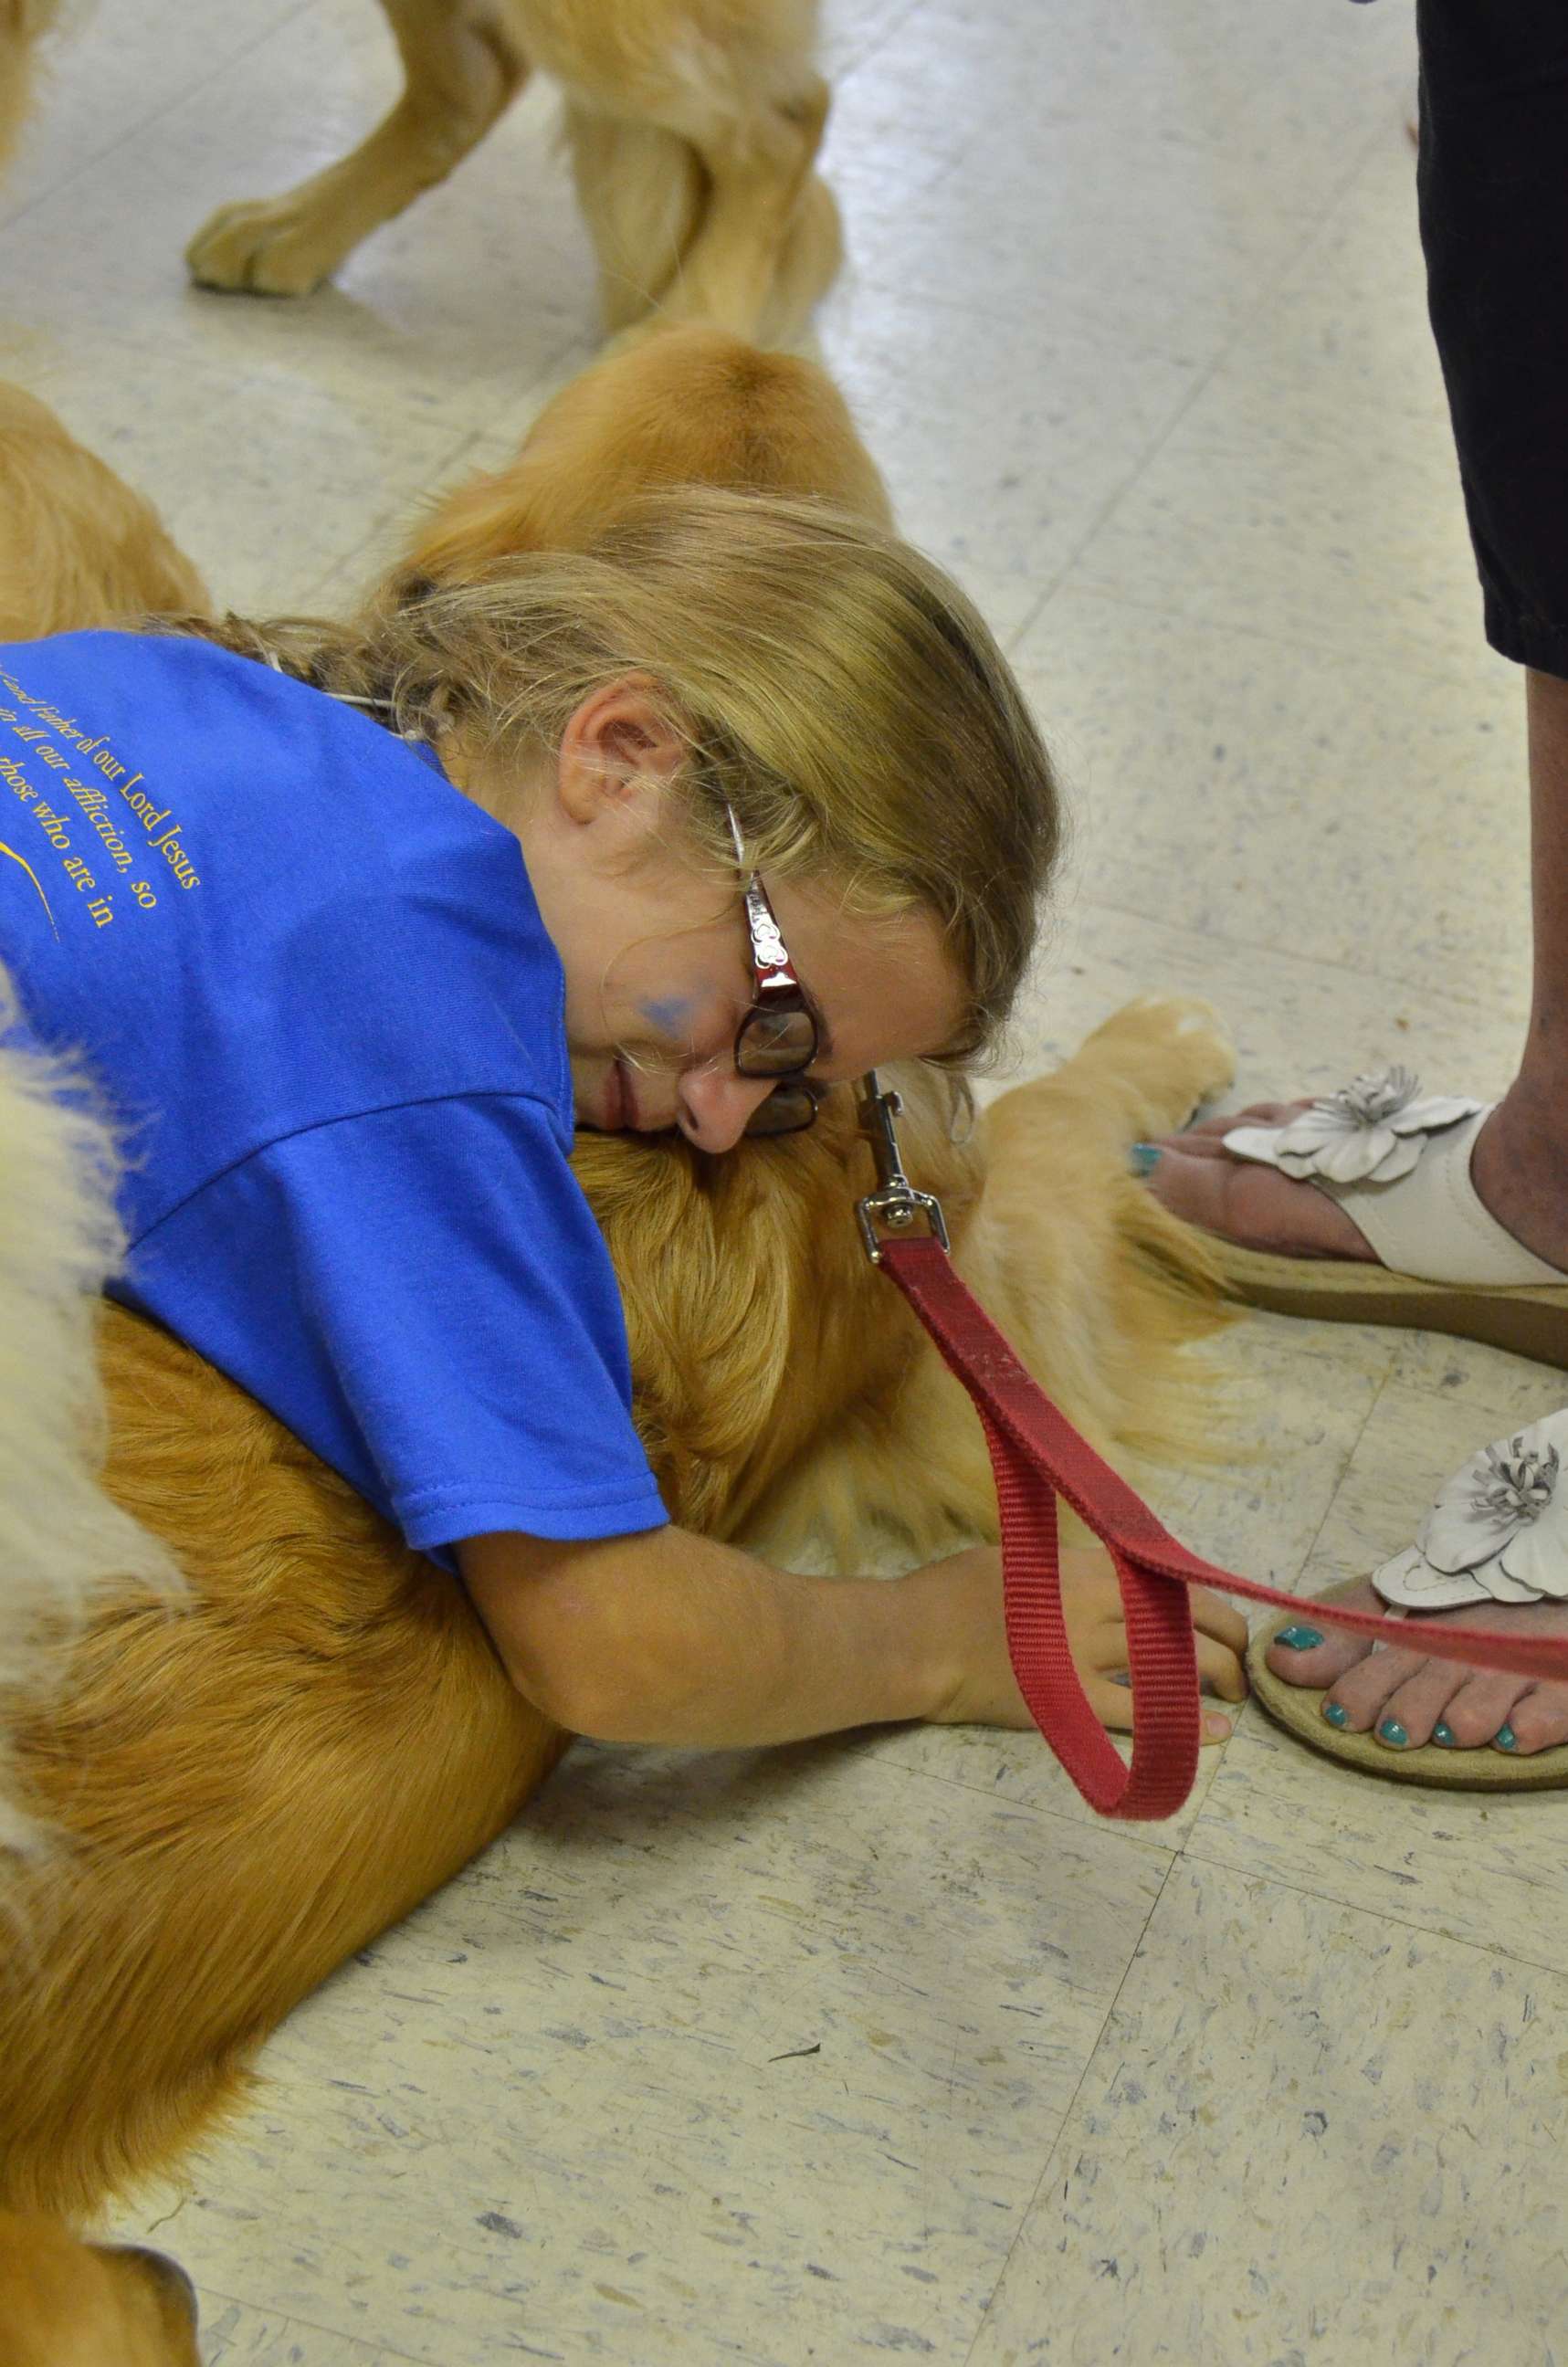 PHOTO: After the Sandy Hook Elementary School shooting in 2012, LCC's comfort dogs, including one named Howe, offered support to children and adults.